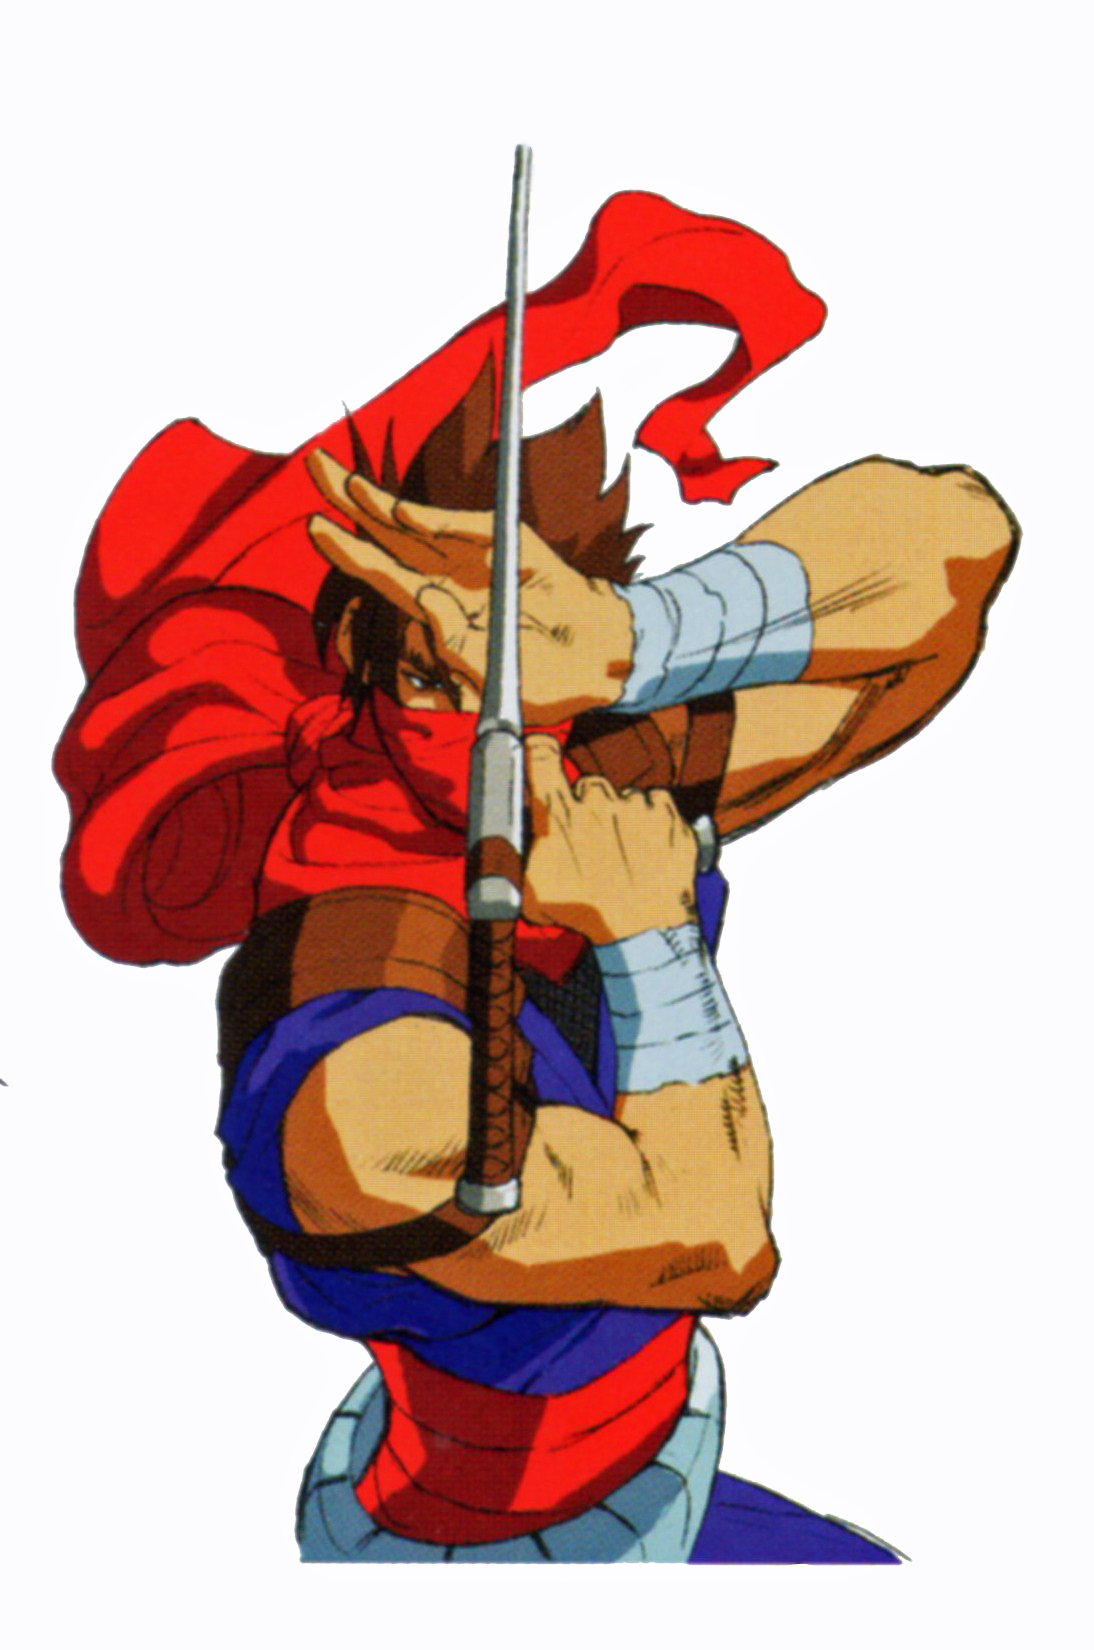 Strider Hiryu screenshots, image and picture